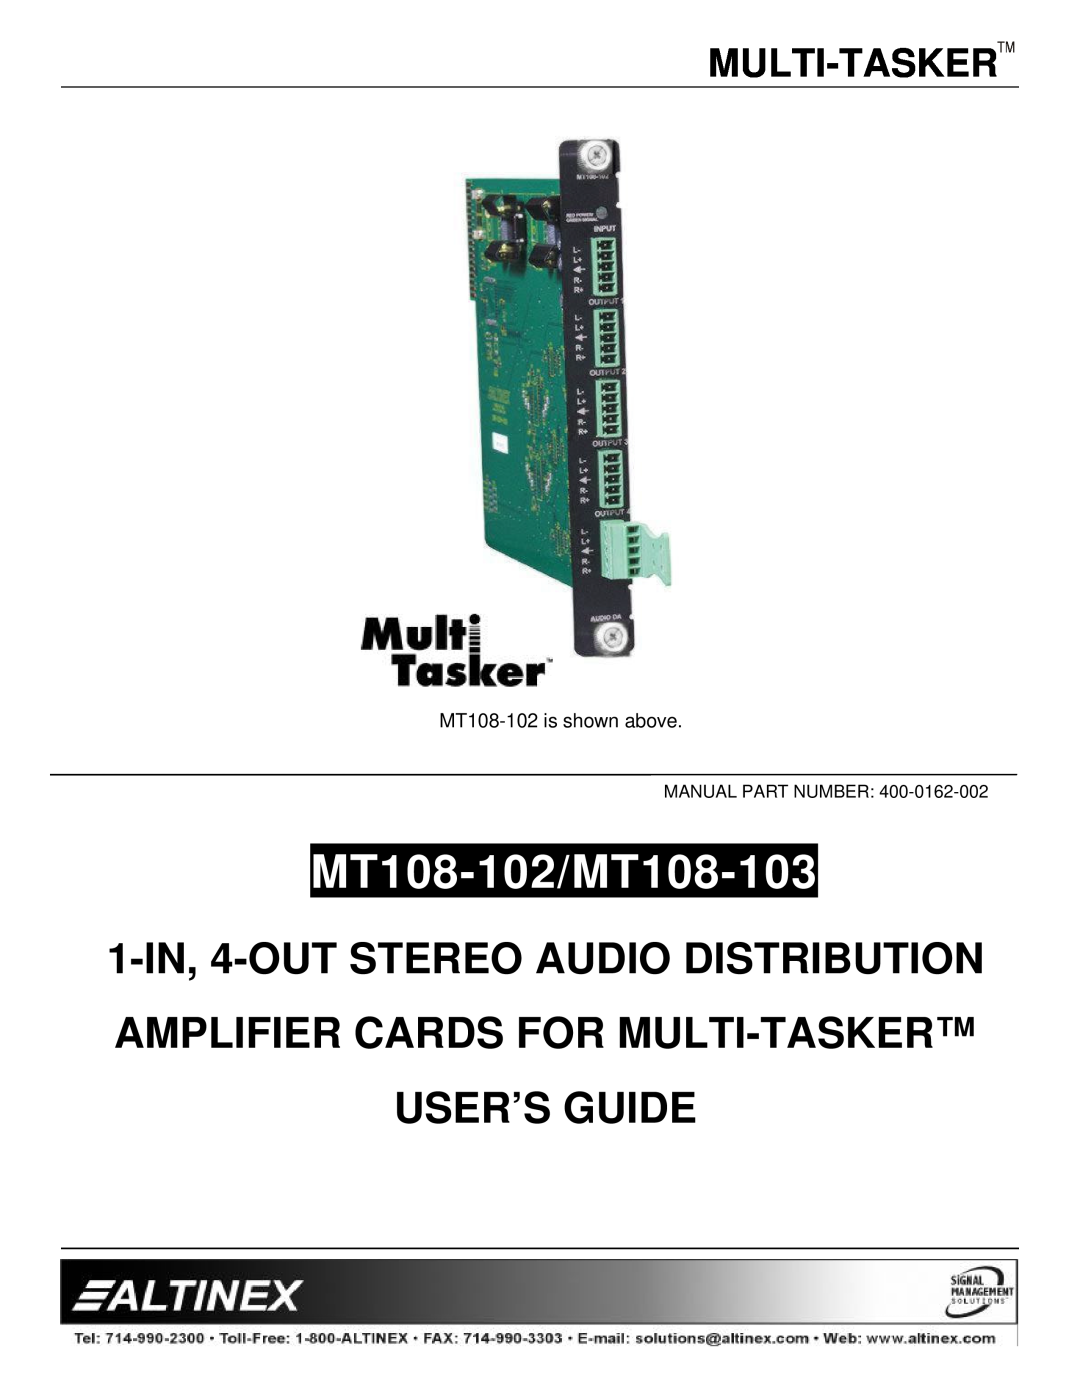 Altinex manual Multi-Tasker, MT108-102/MT108-103, 1-IN, 4-OUTSTEREO AUDIO DISTRIBUTION 